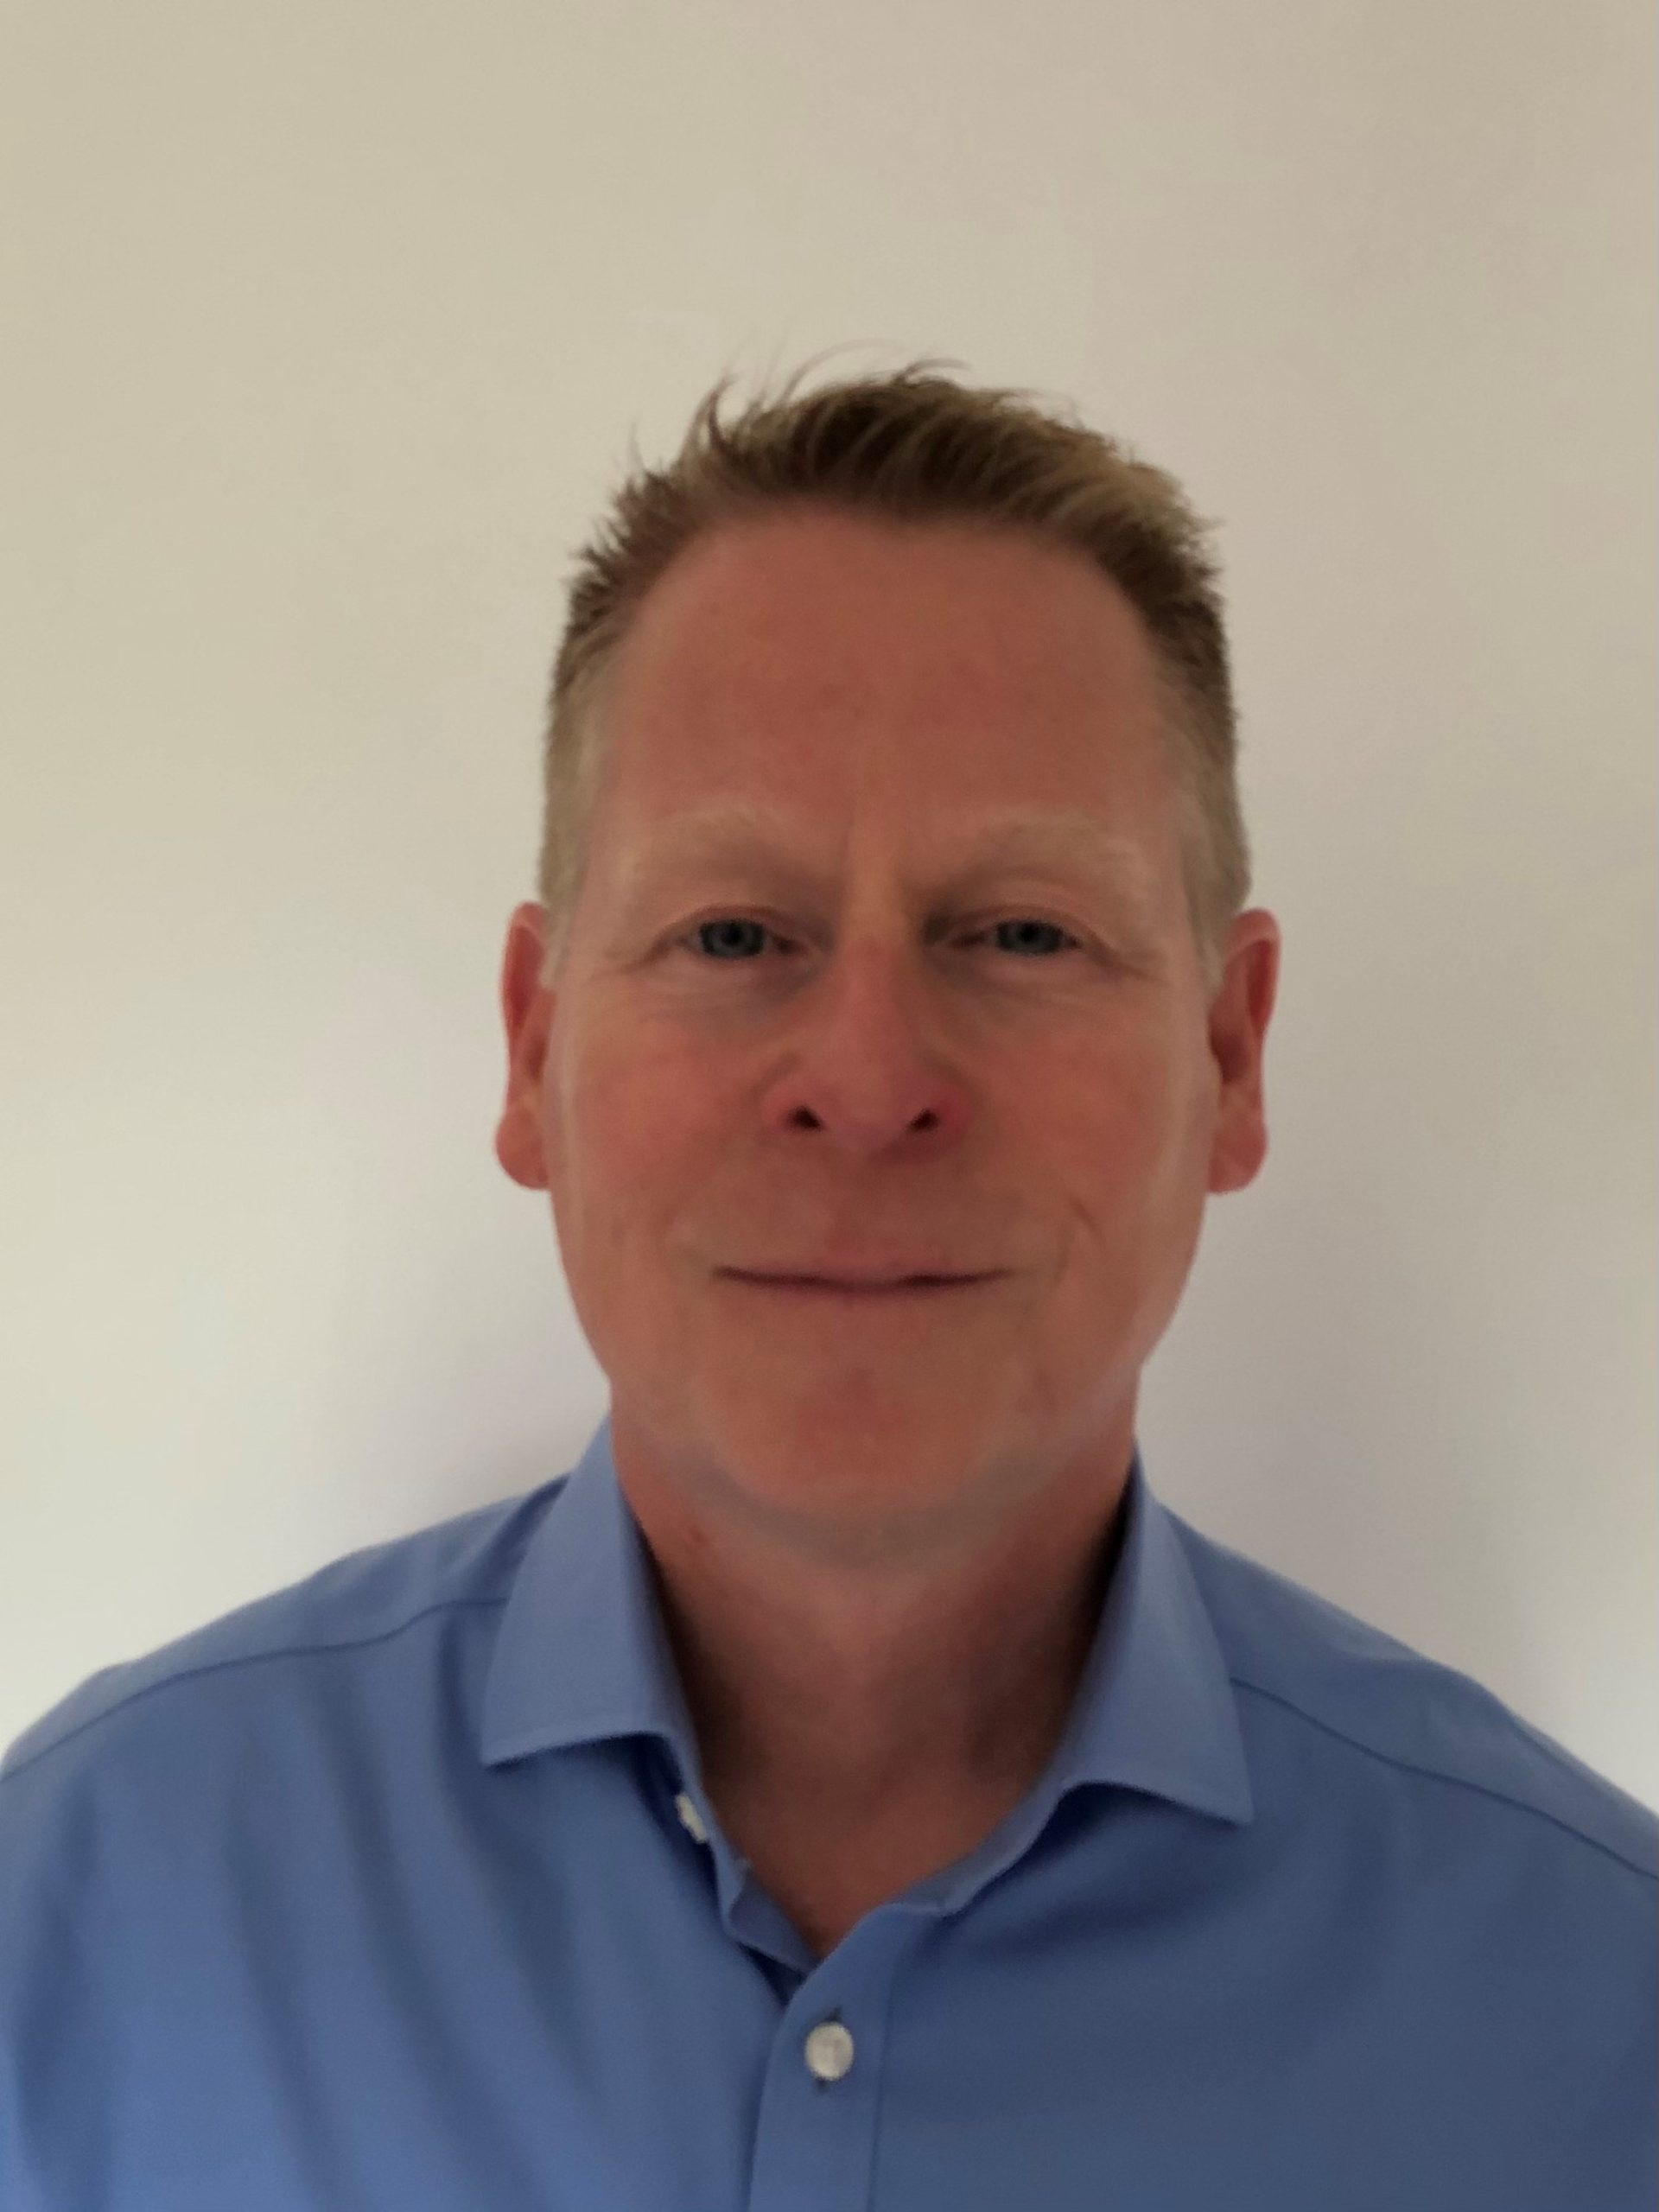 Bestway appoints Jim Brown as Trading Controller for Catering, Fresh and Frozen